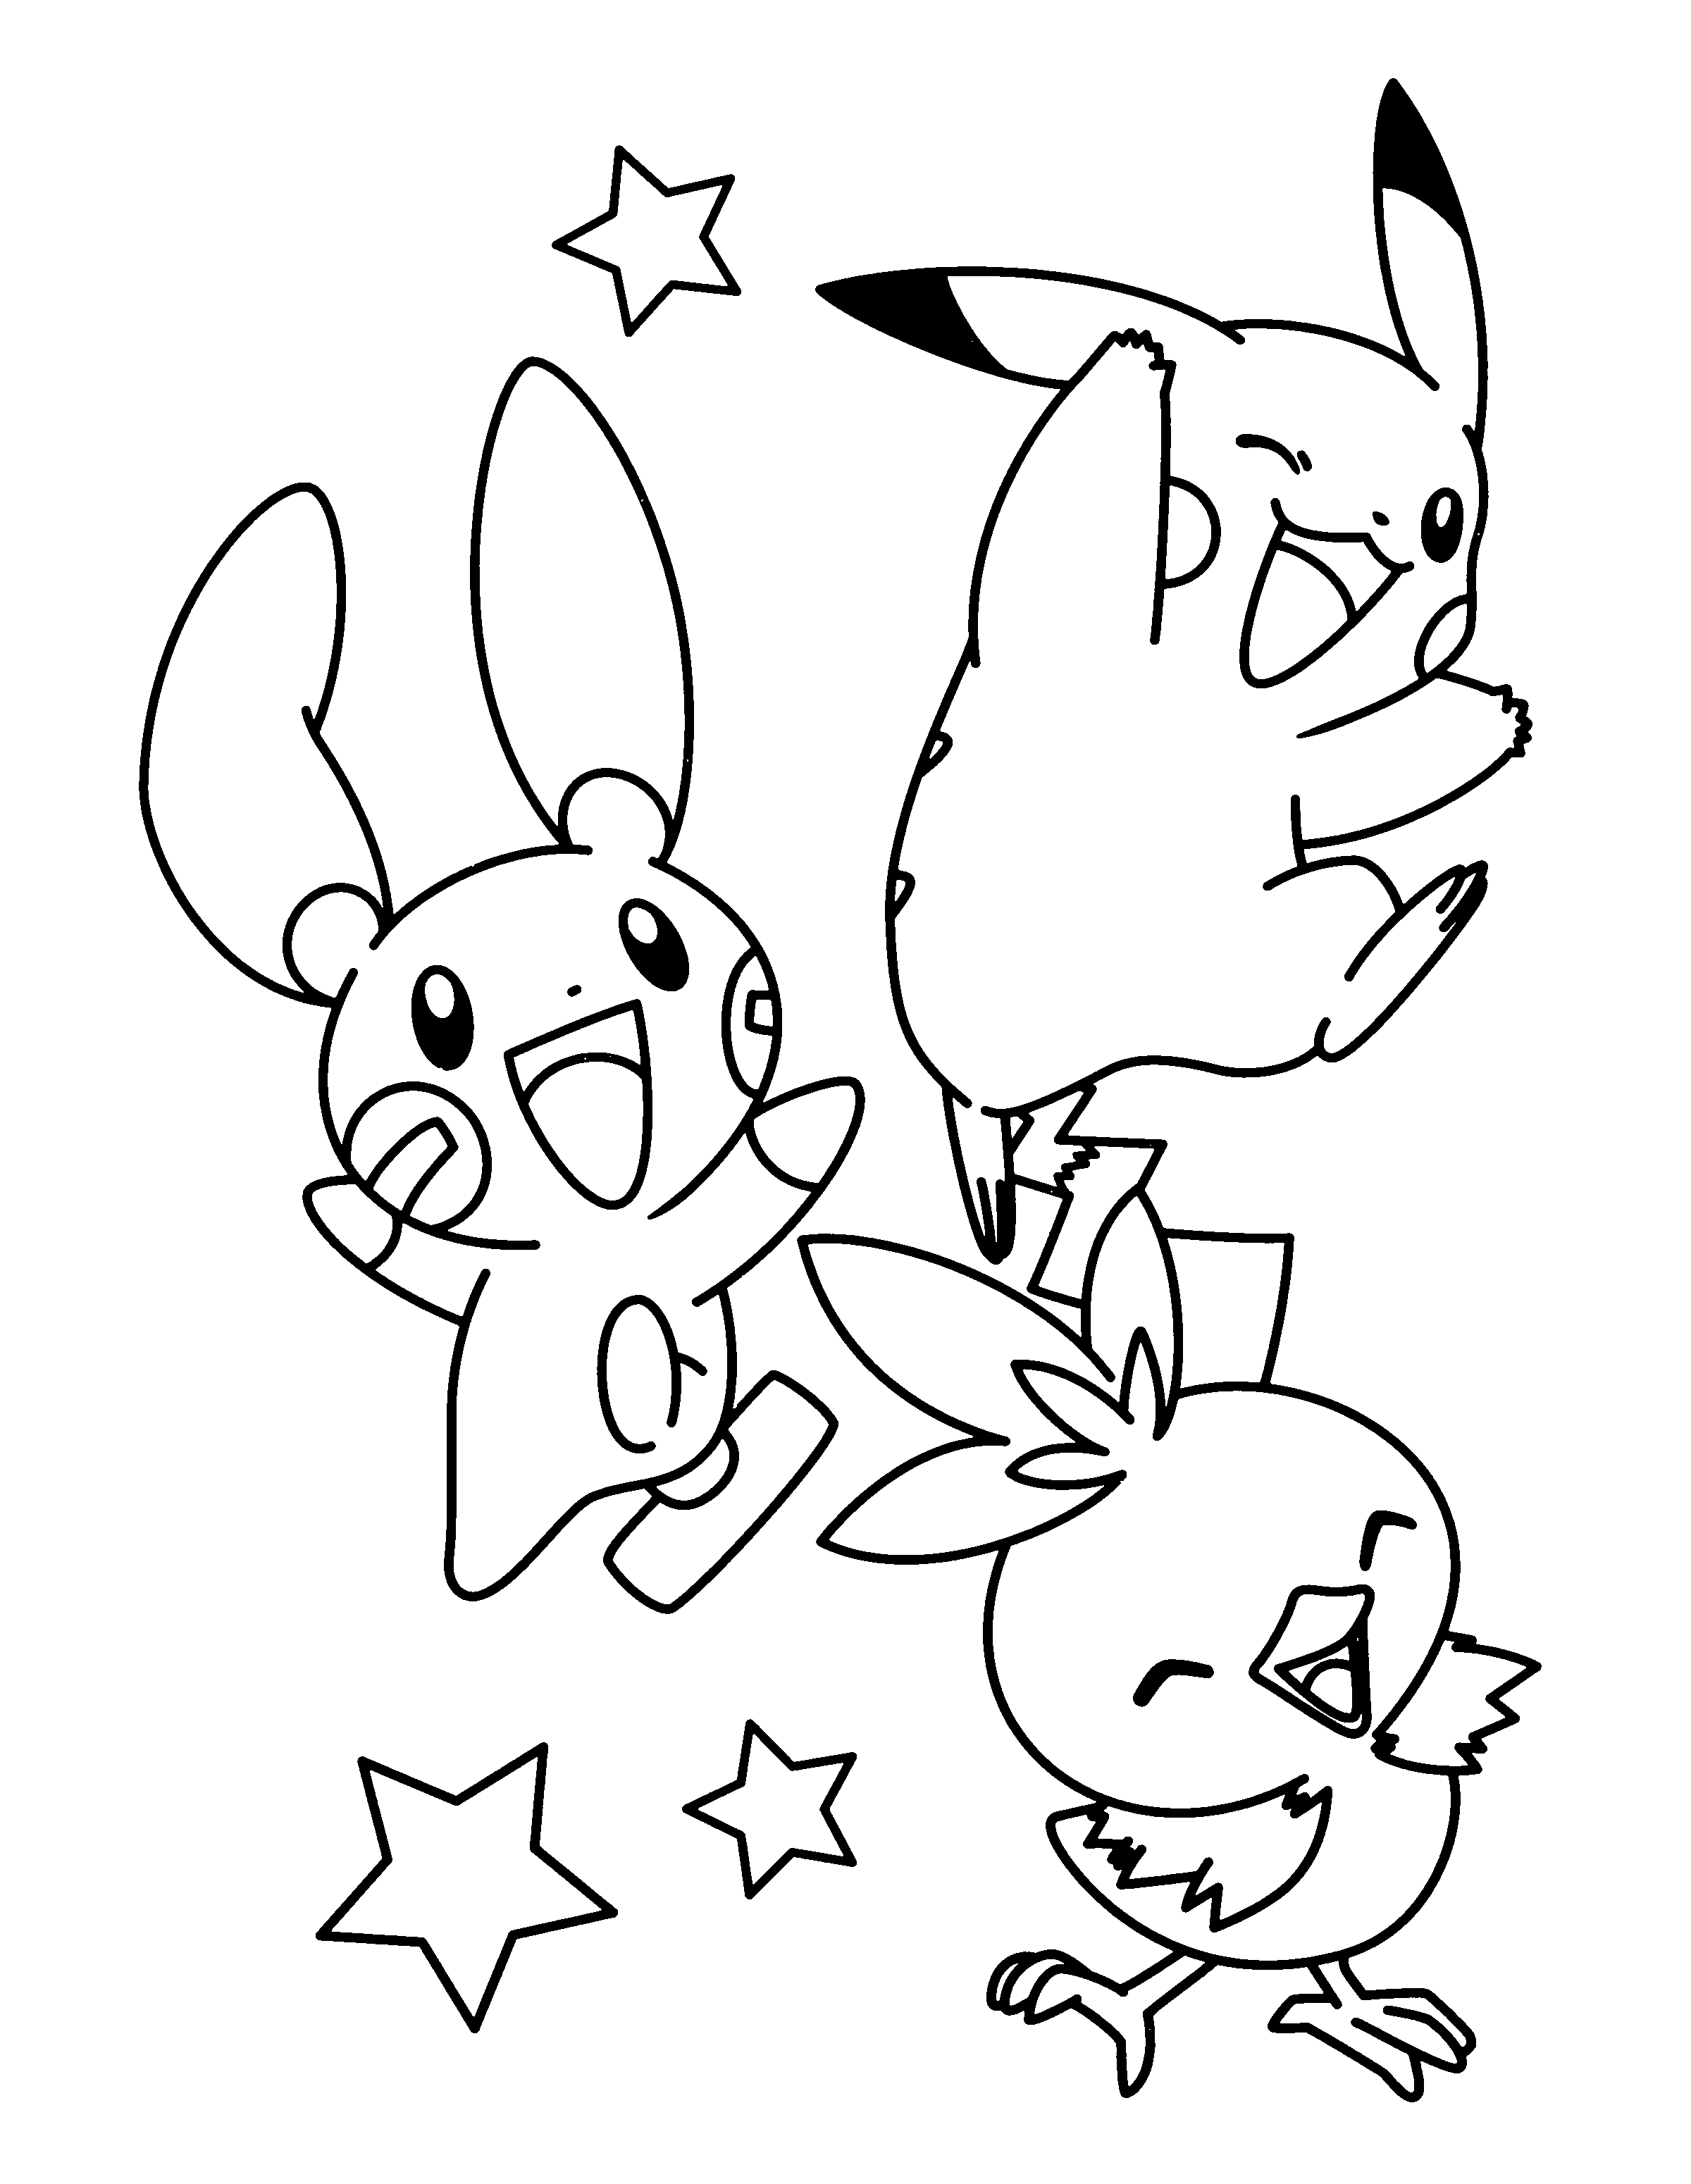 Coloring Pages Of Cute Pokemon - Creative Art